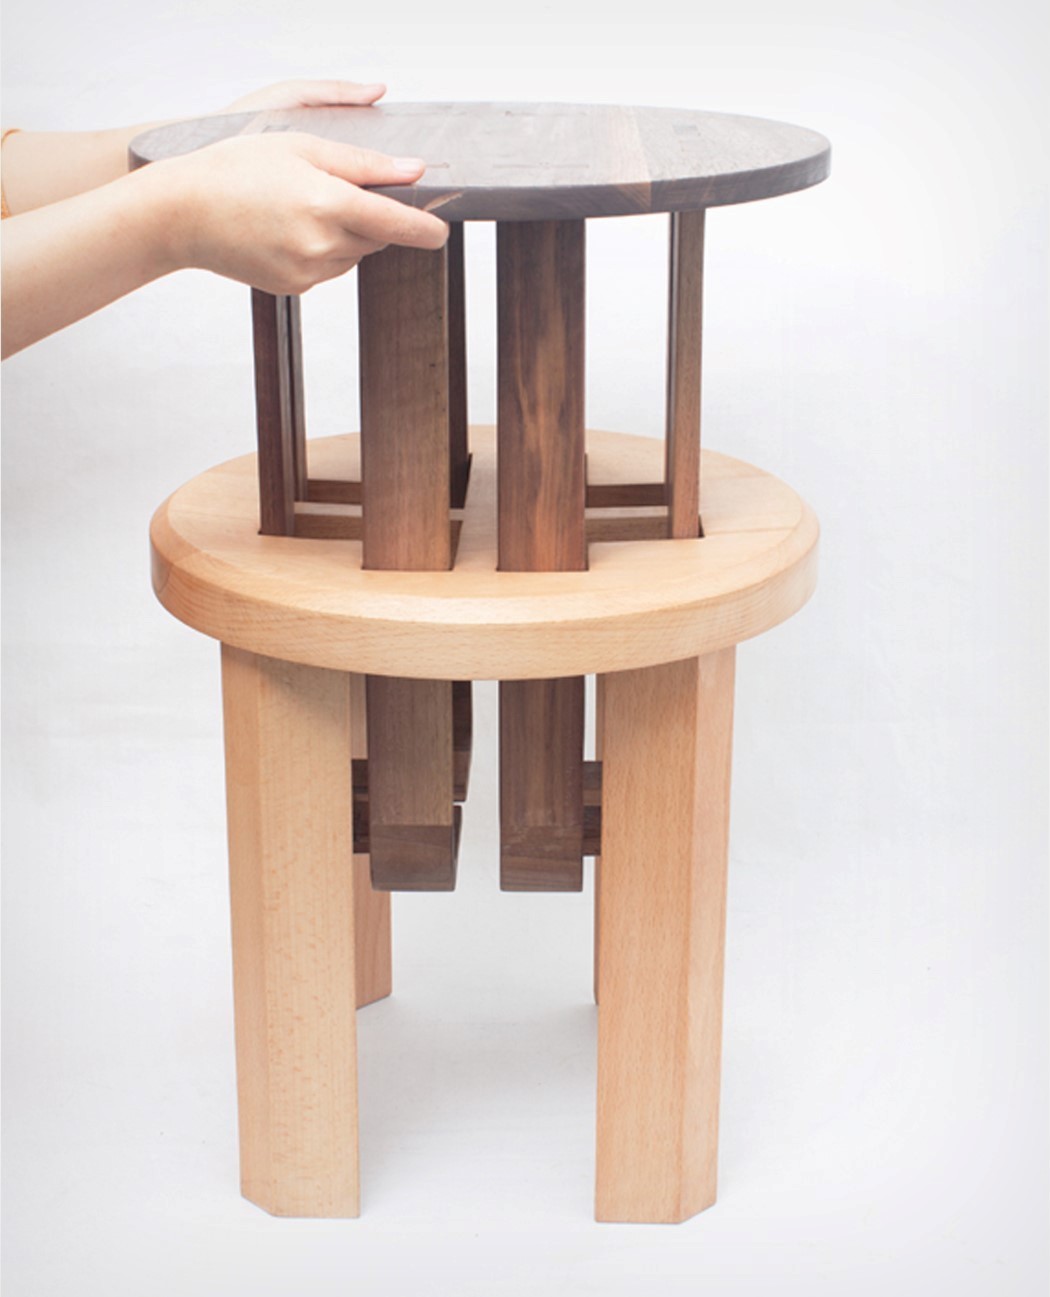 Nesting stools that also transform into 